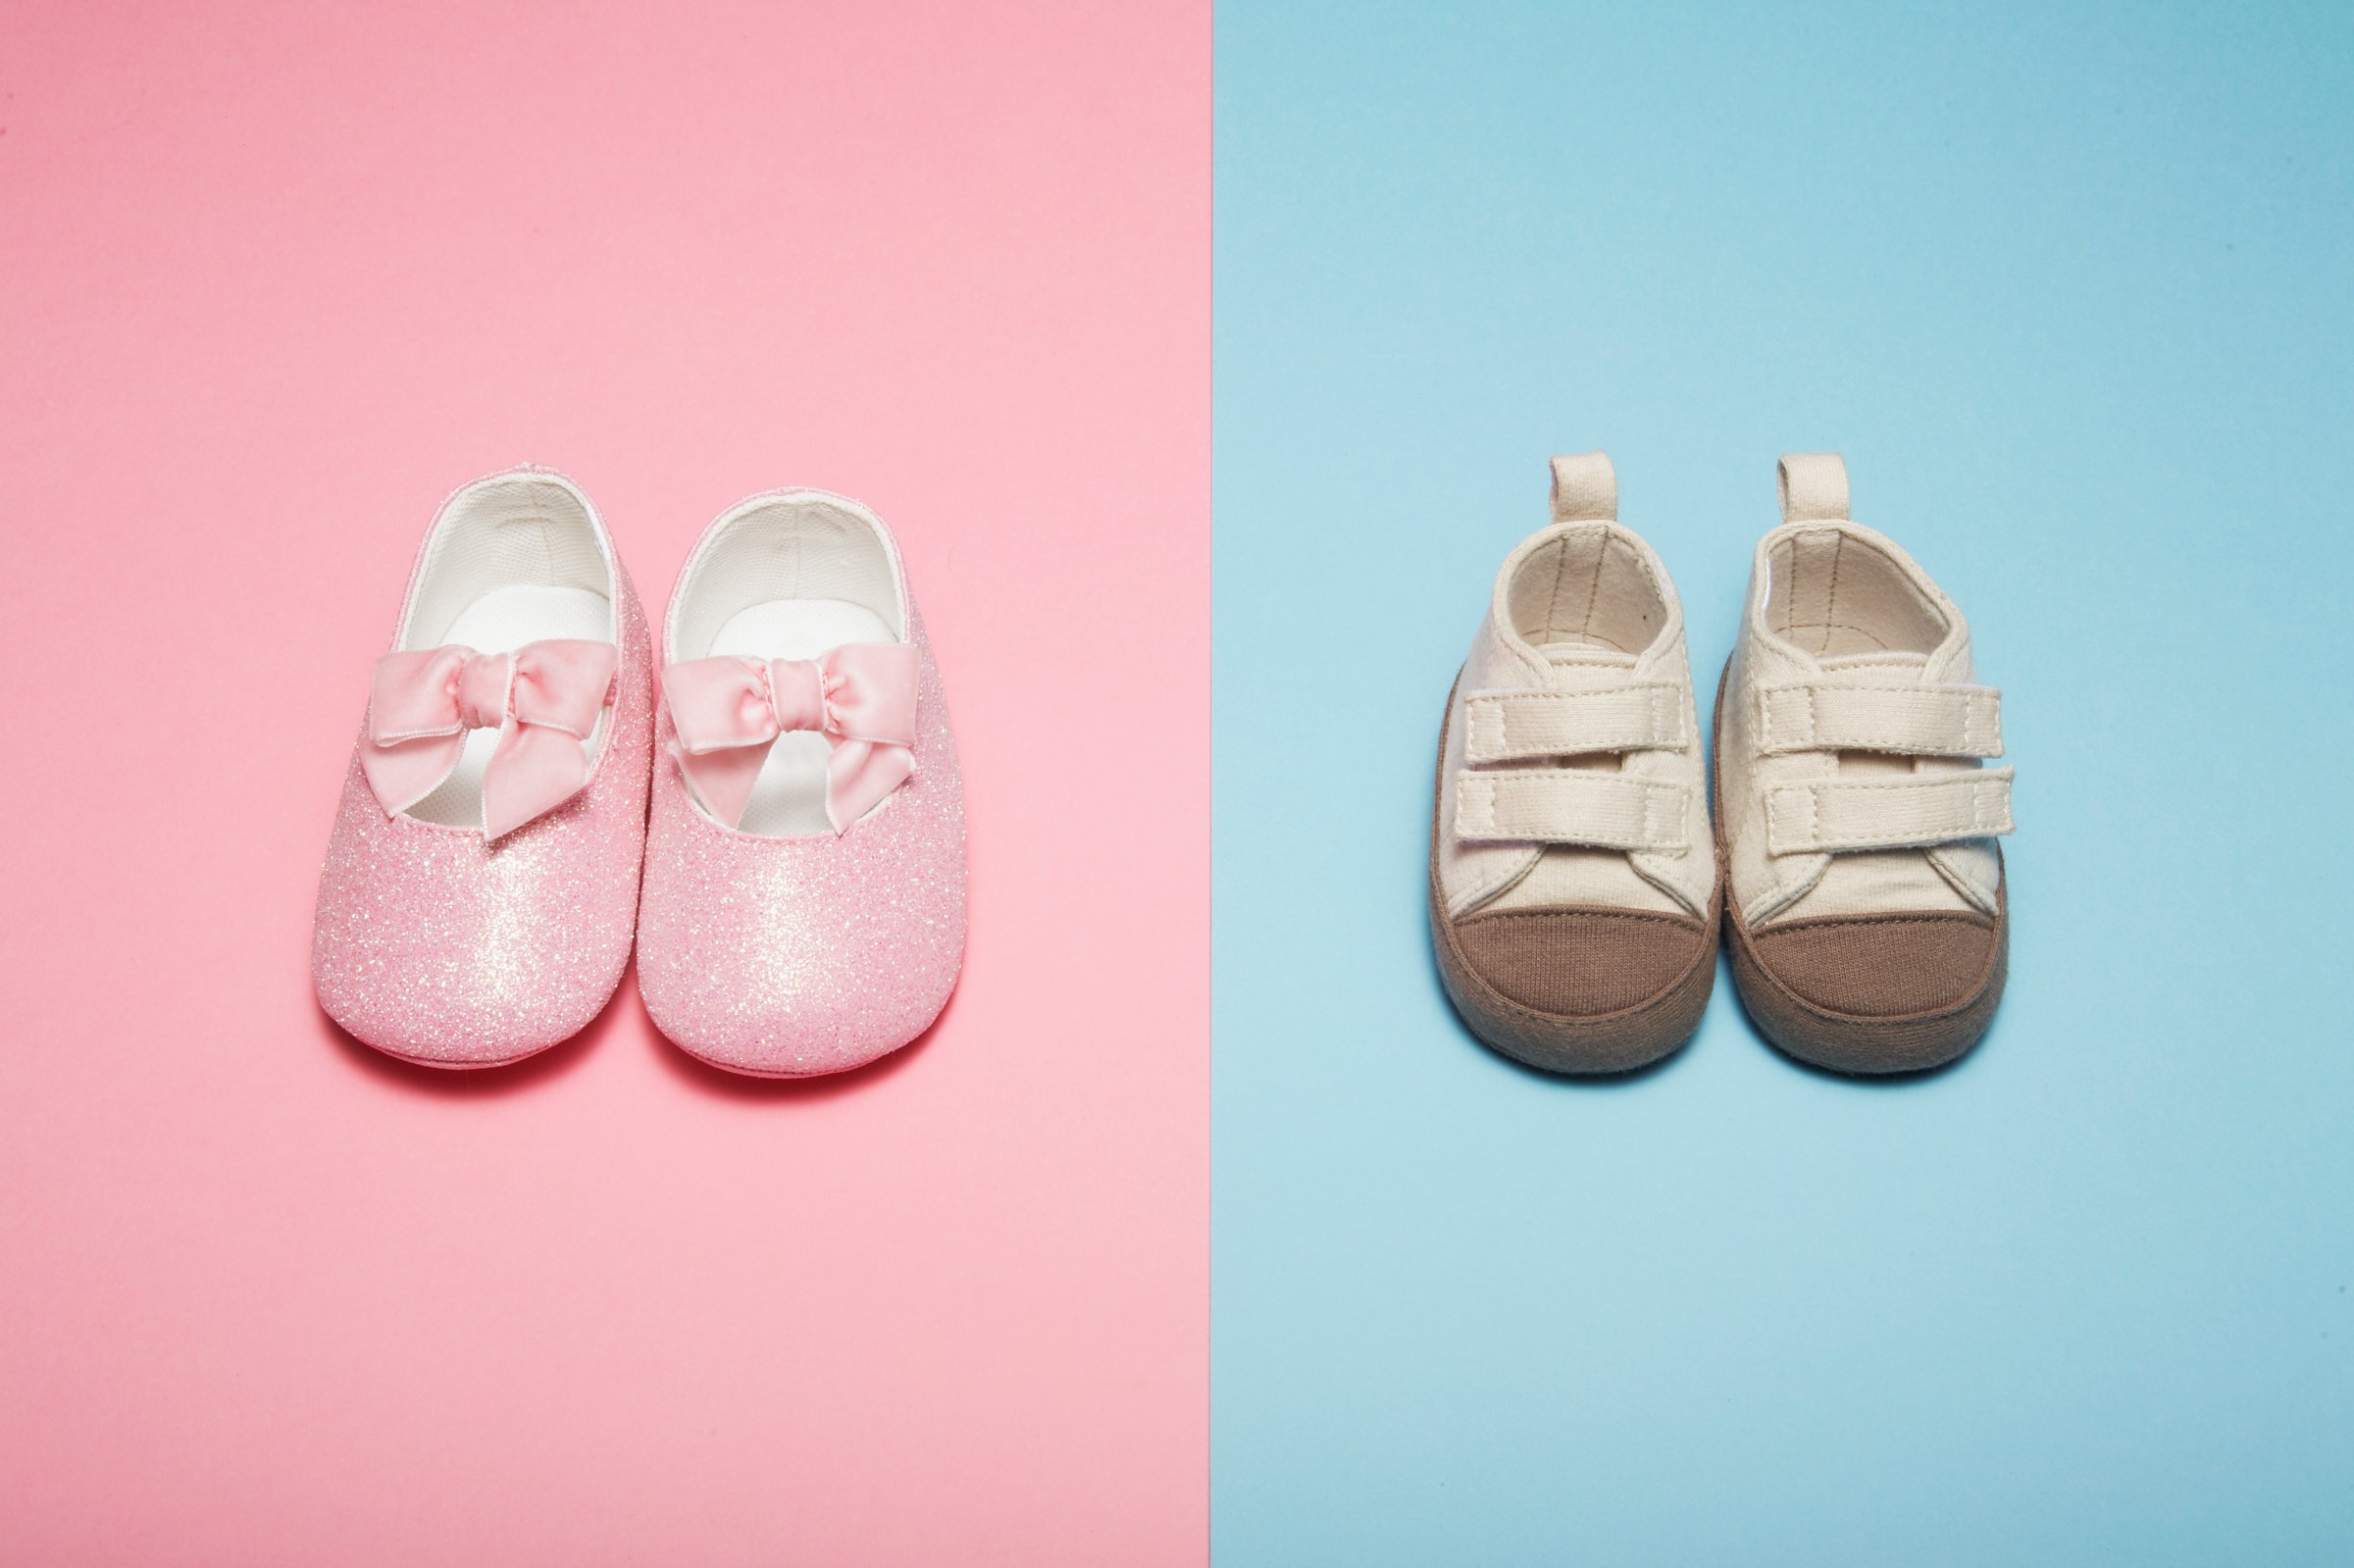 Two Pairs of Baby Shoes